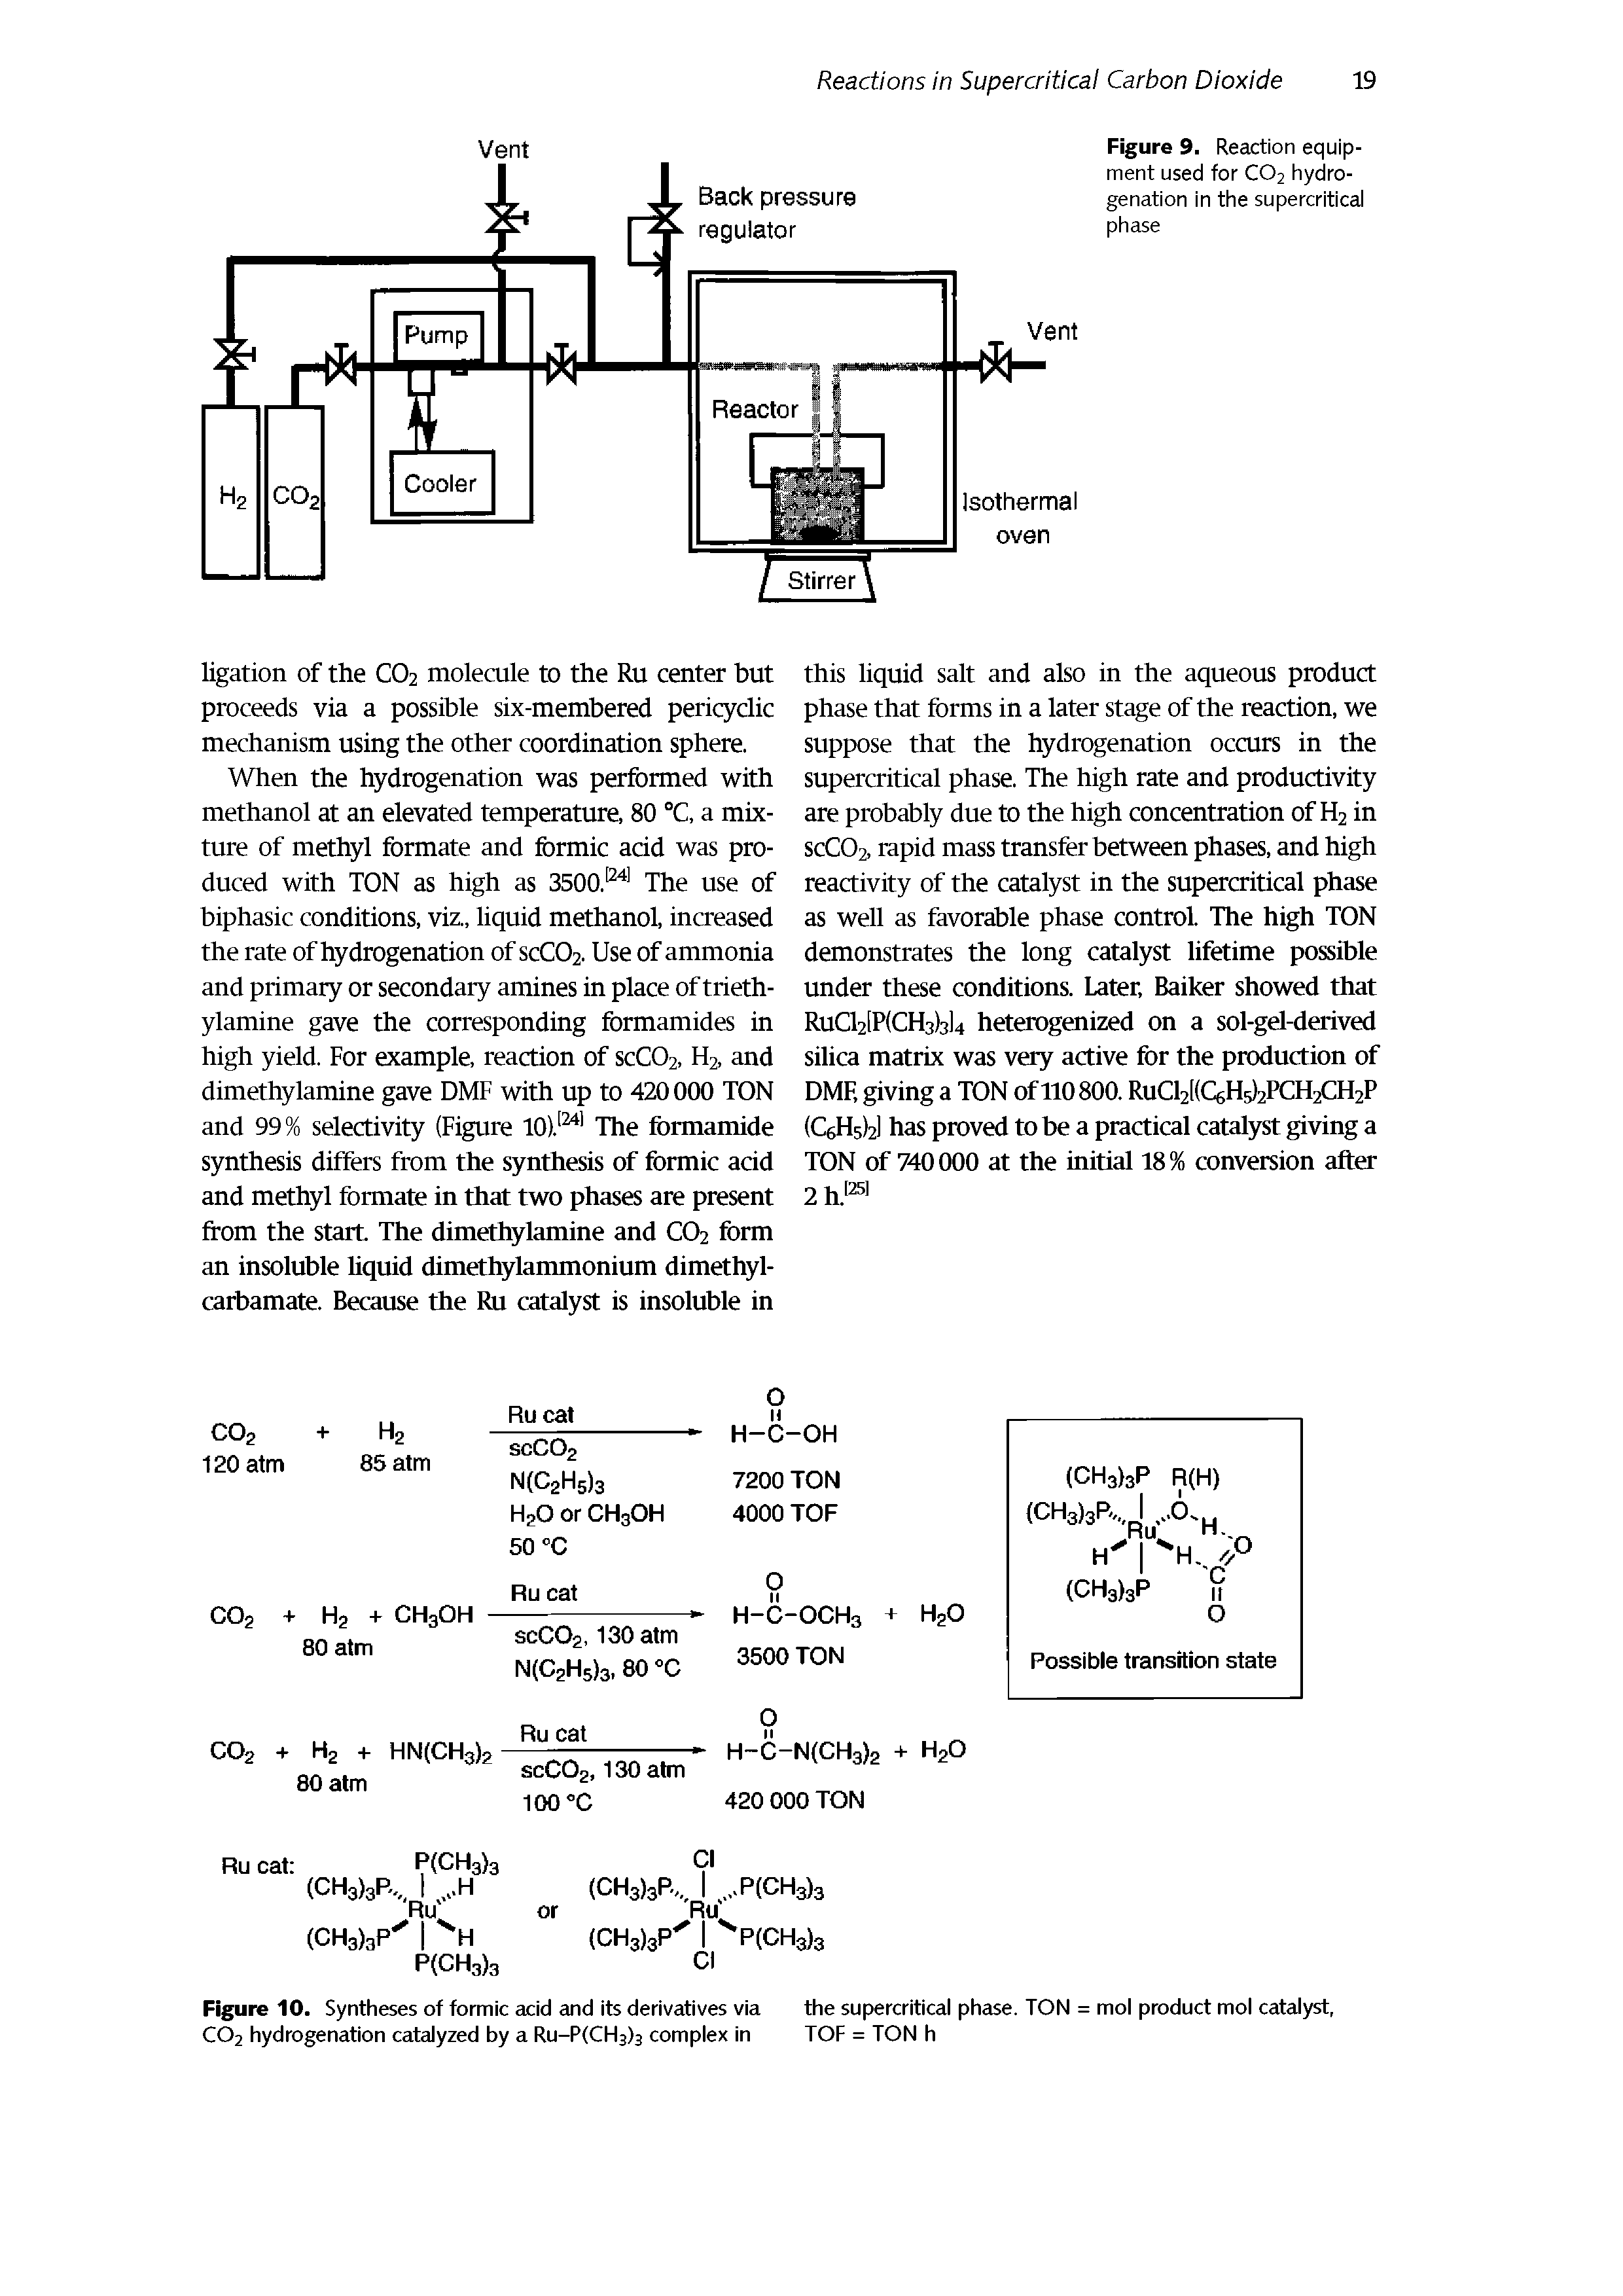 Figure 9. Reaction equipment used for C02 hydrogenation in the supercritical phase...